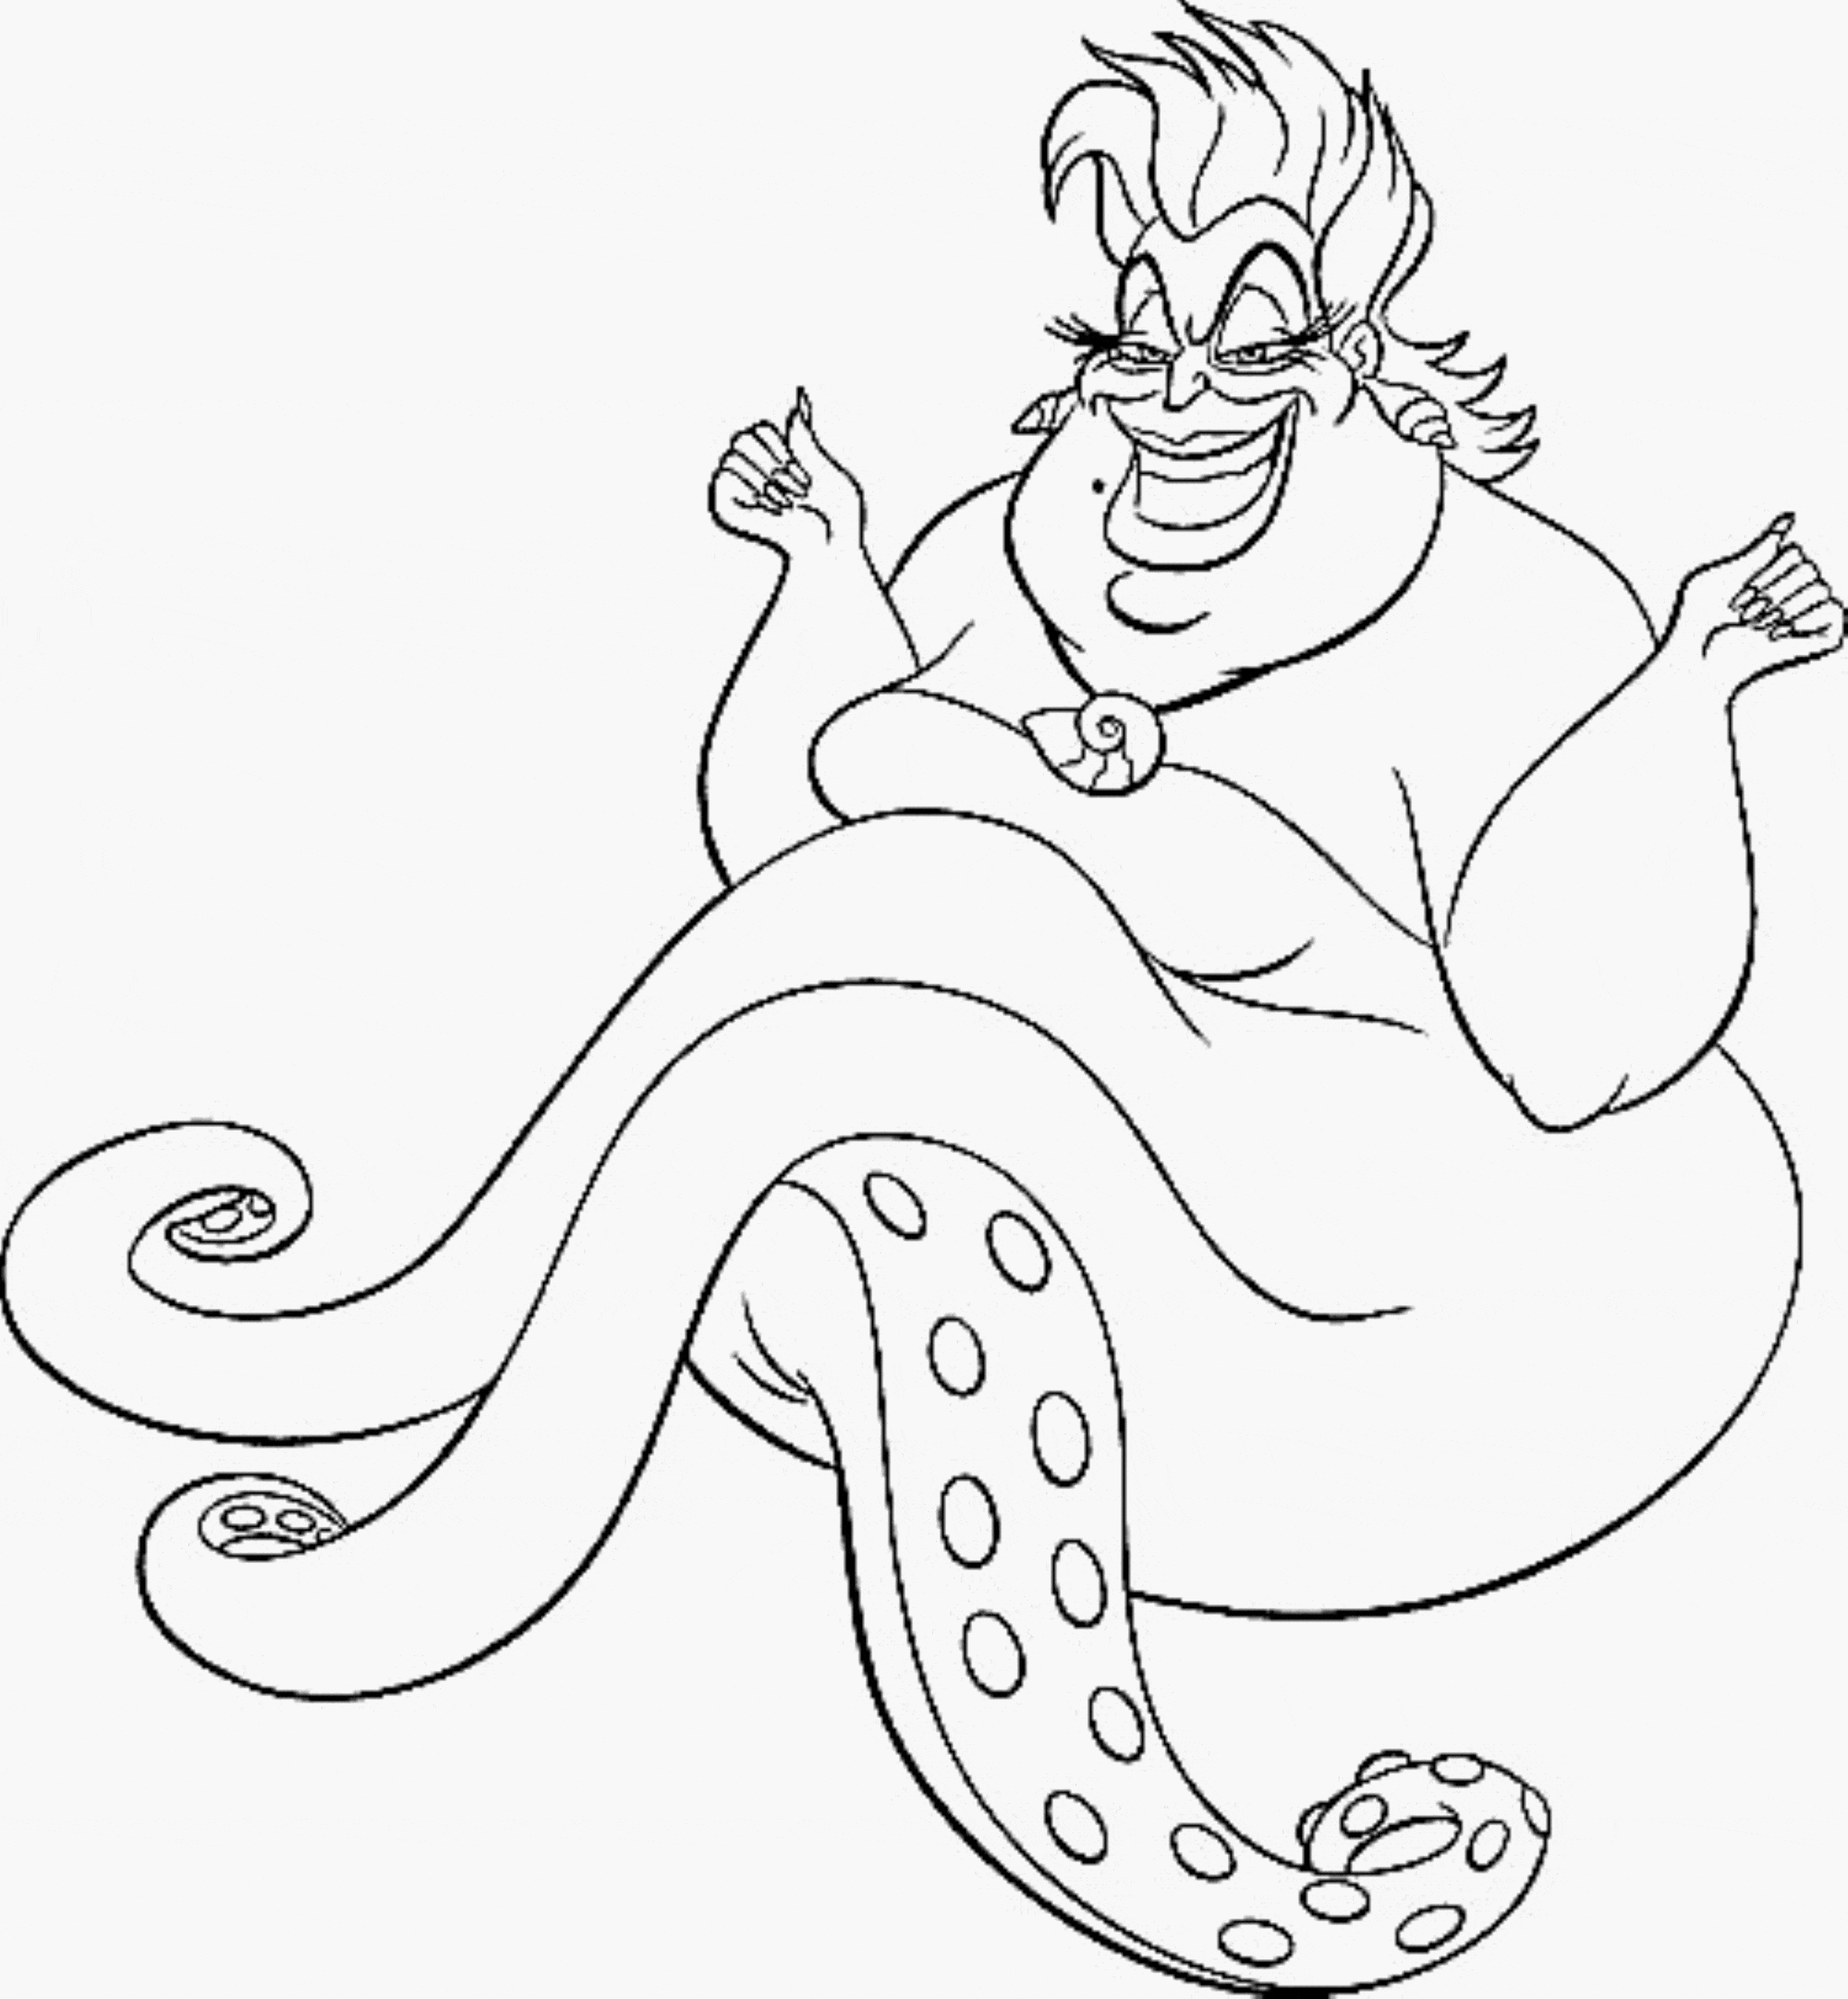 little mermaid color pages the little mermaid coloring pages to download and print little pages color mermaid 